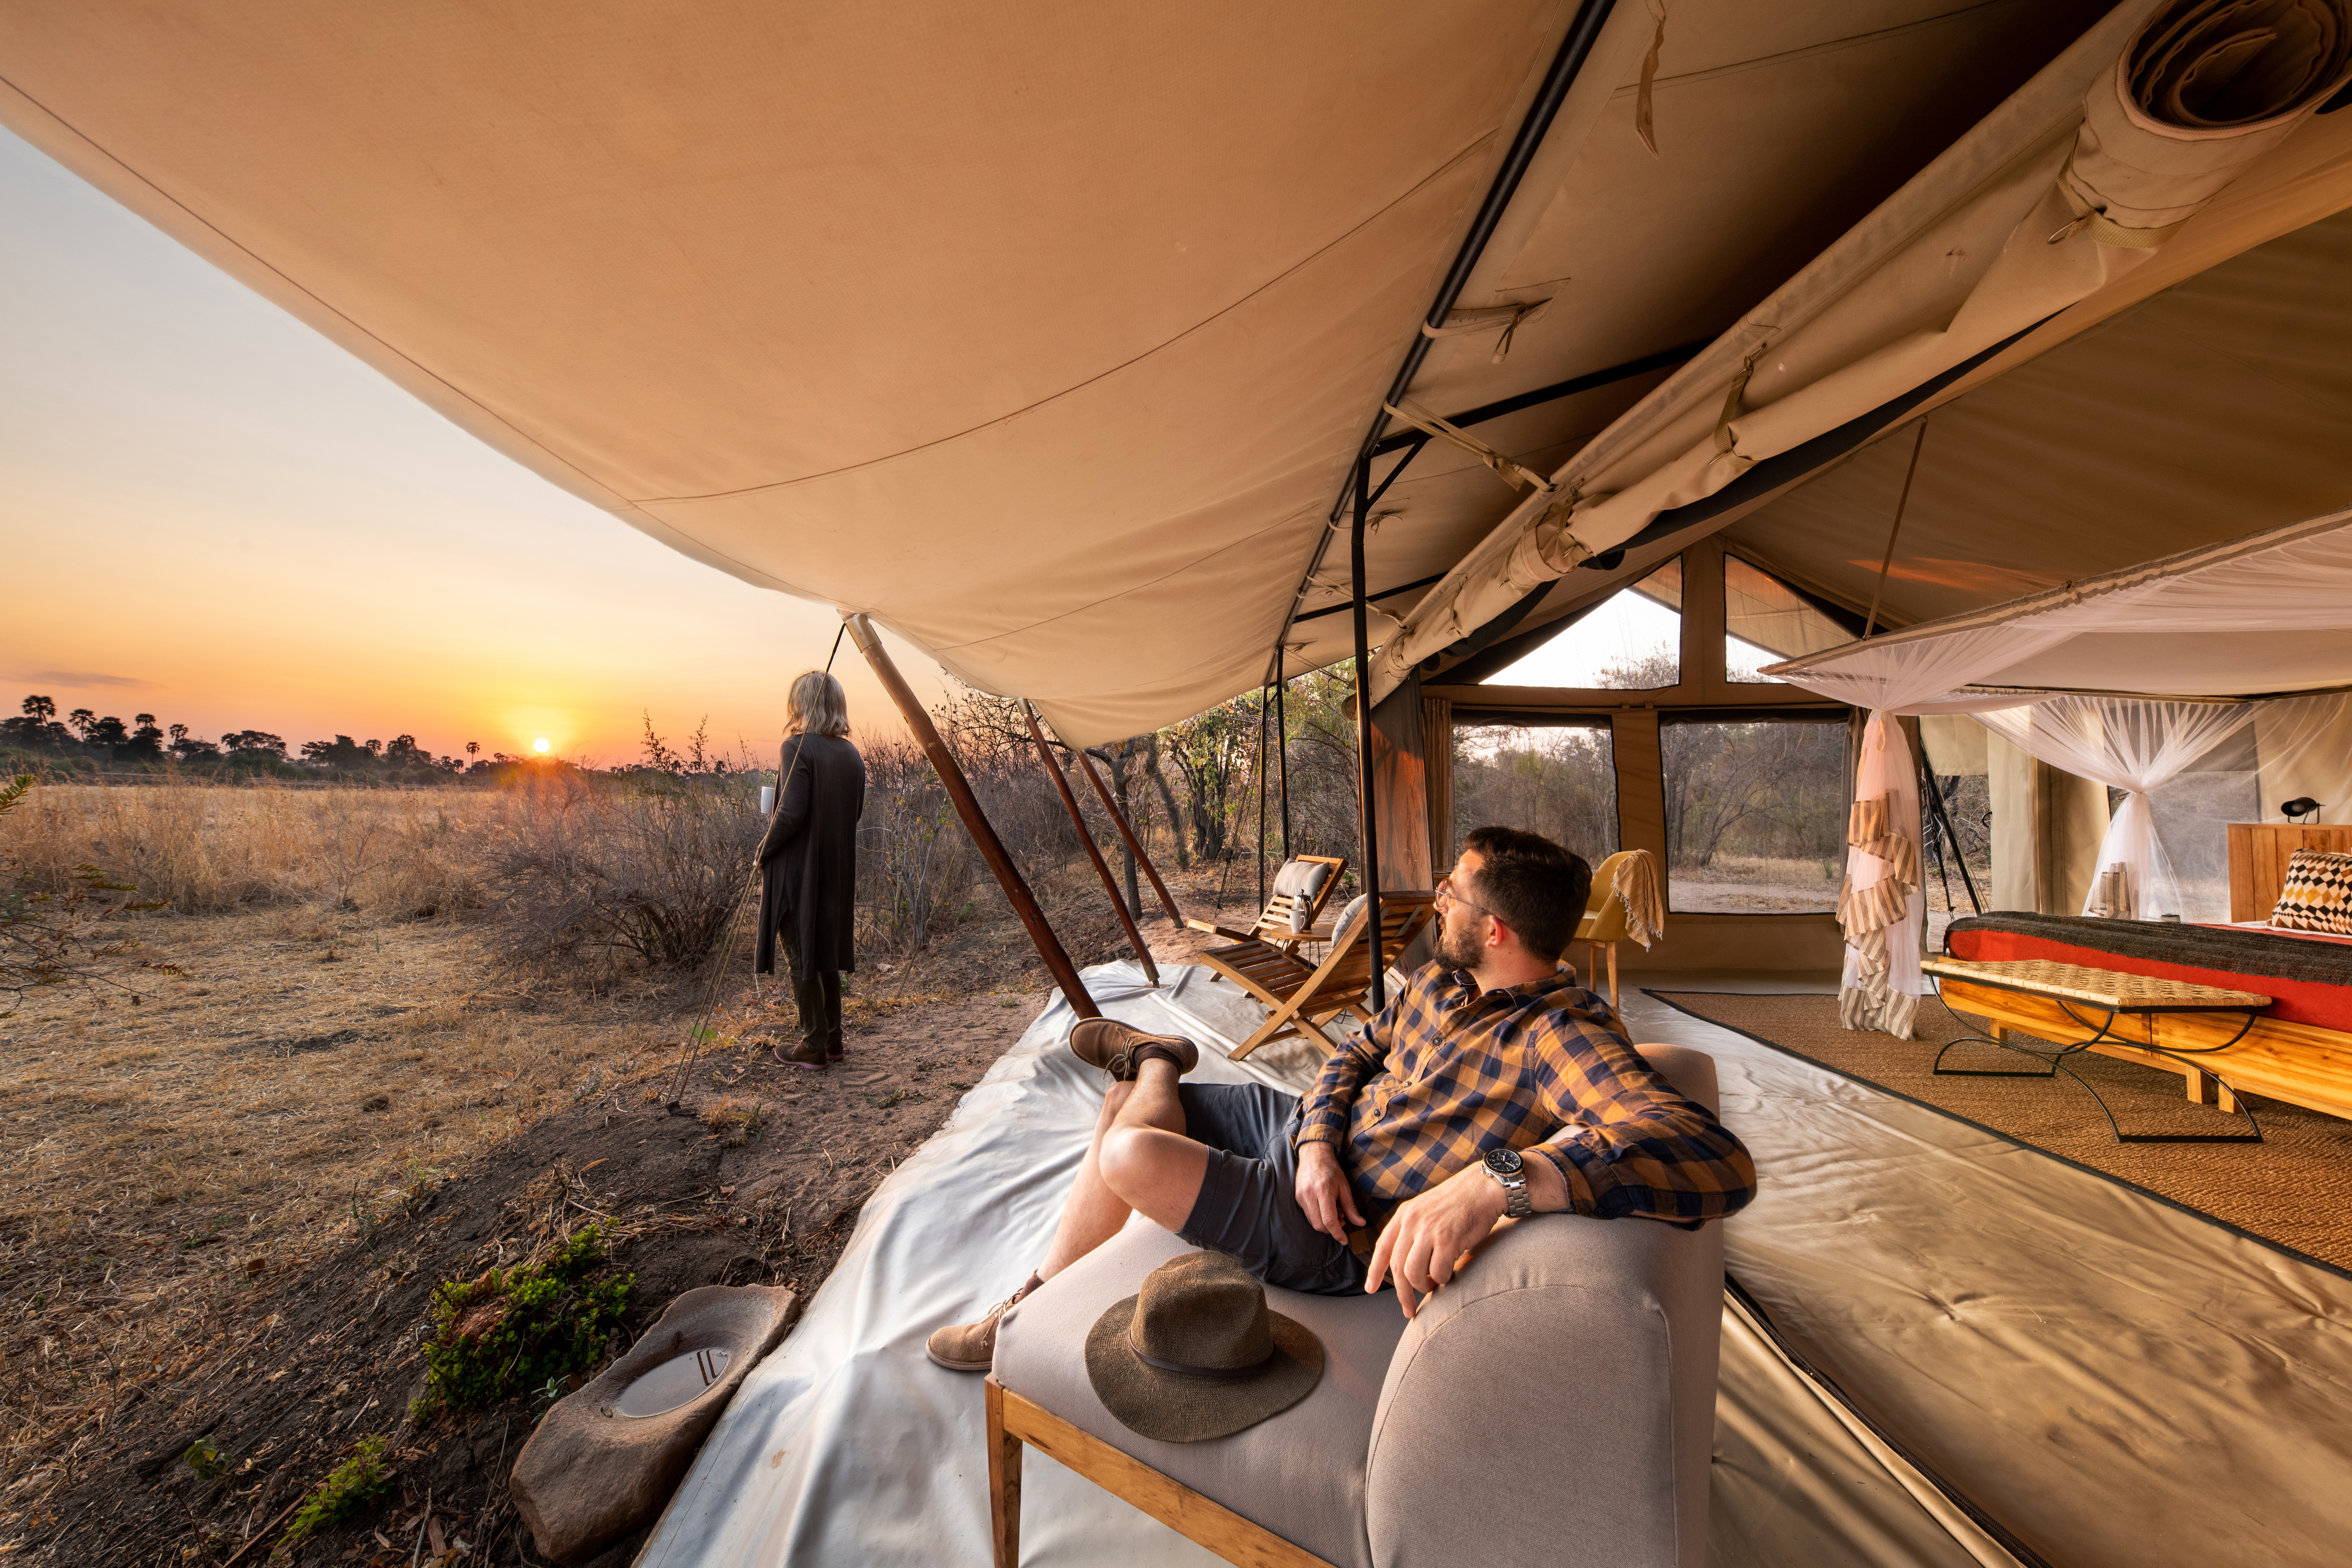 Guests in Kwihala Camp watch the sun set over the expanse of Ruaha National Park.